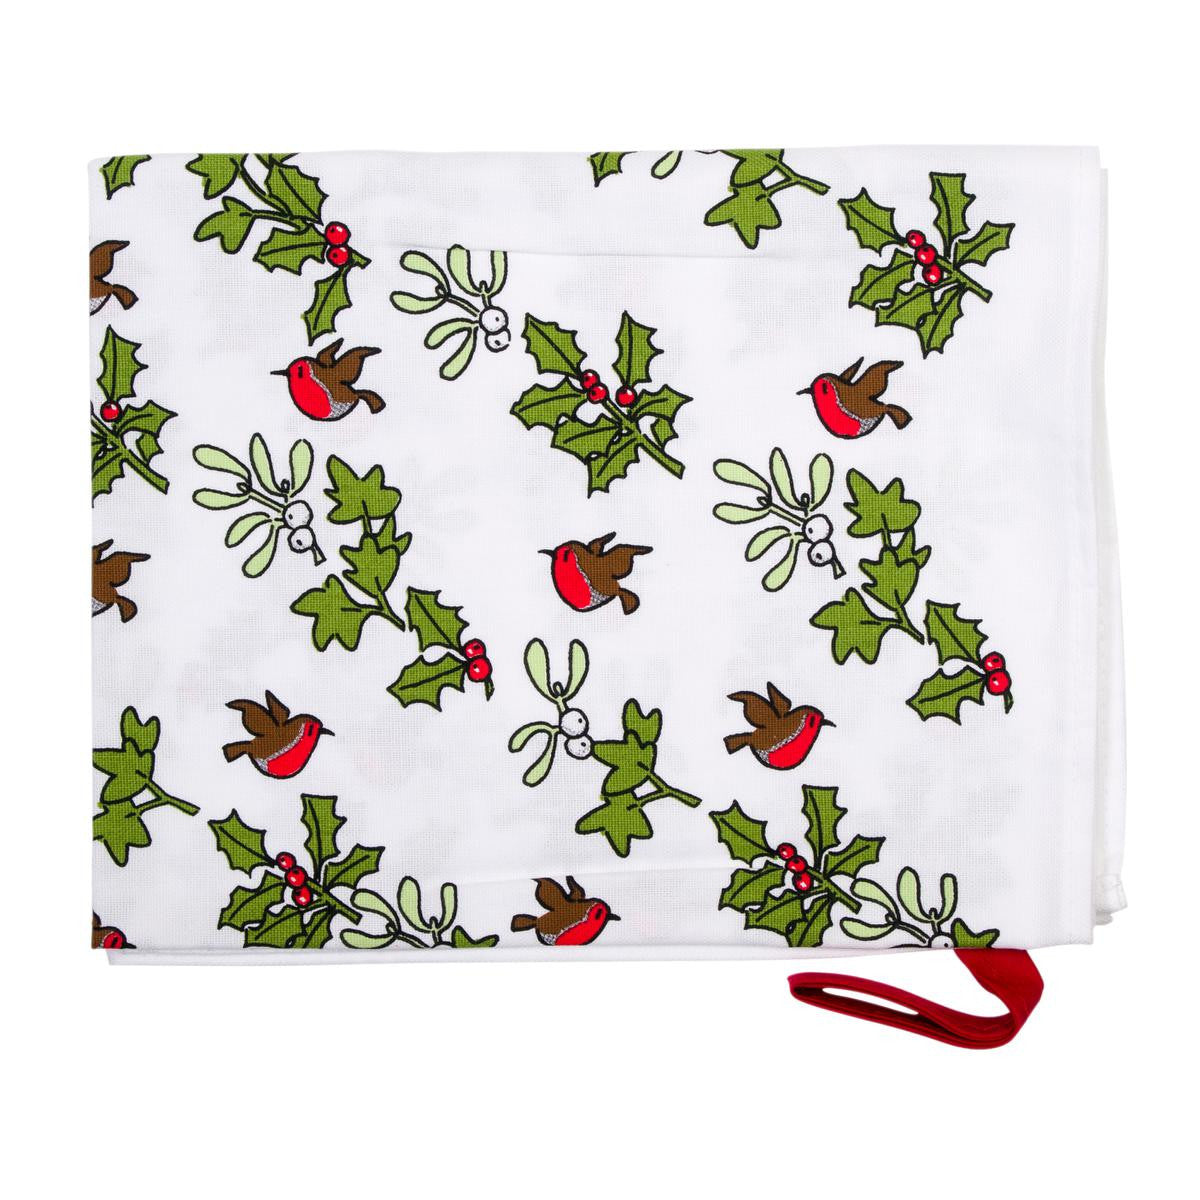 Holly & Ivy cotton tea towel from Alison Gardner.